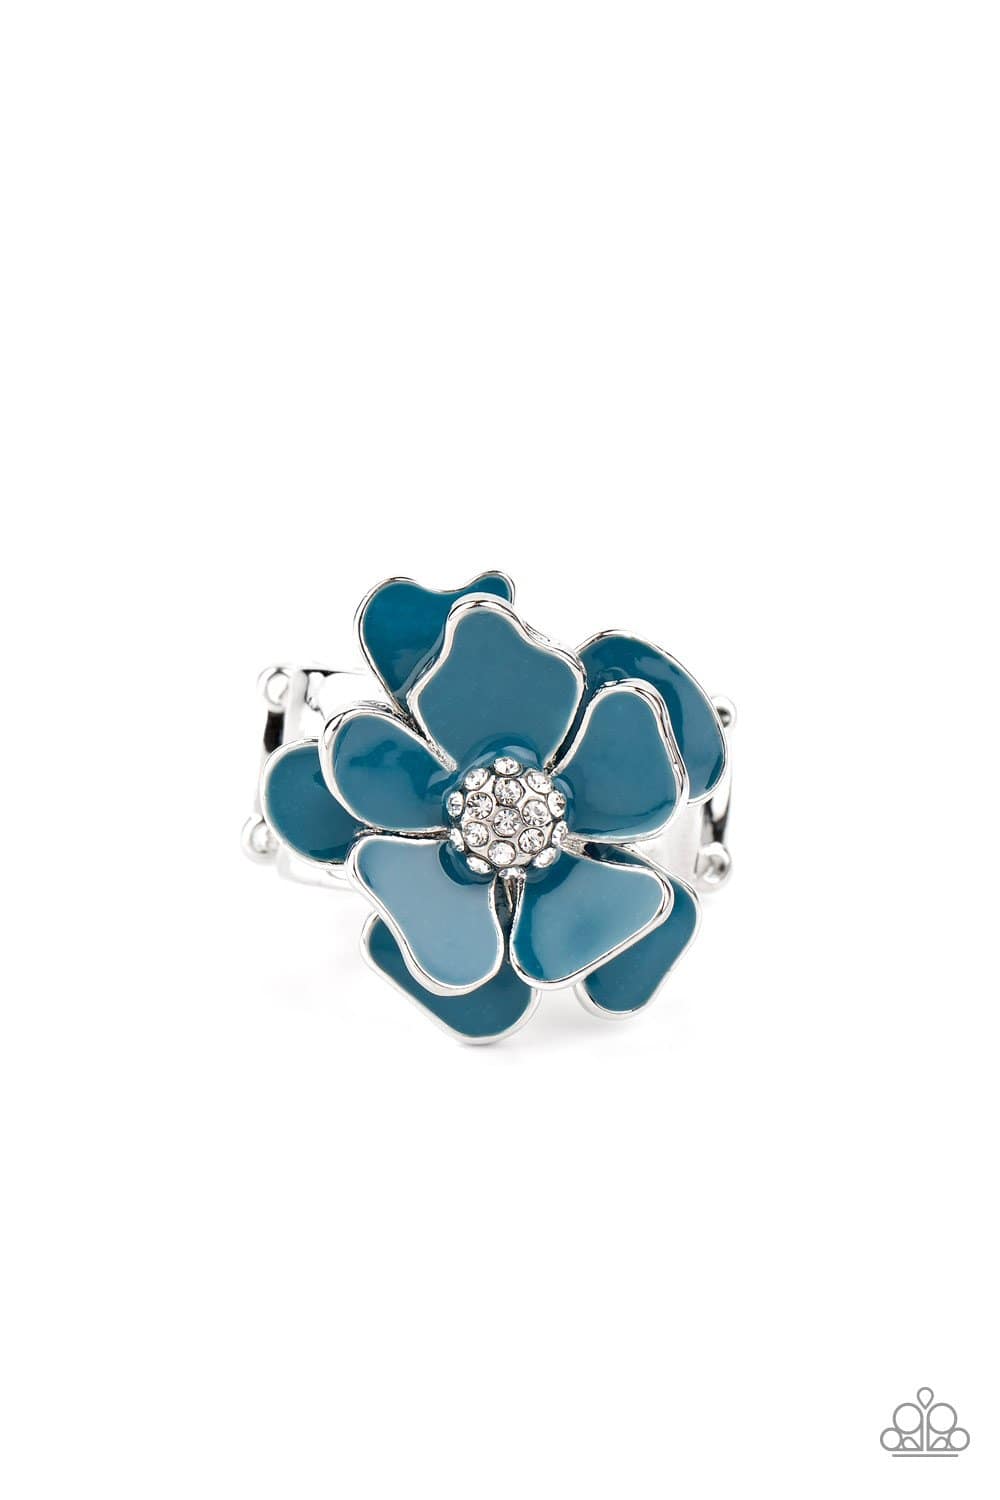 Hibiscus Holiday - Blue Petals Ring - Paparazzi Accessories - GlaMarous Titi Jewels